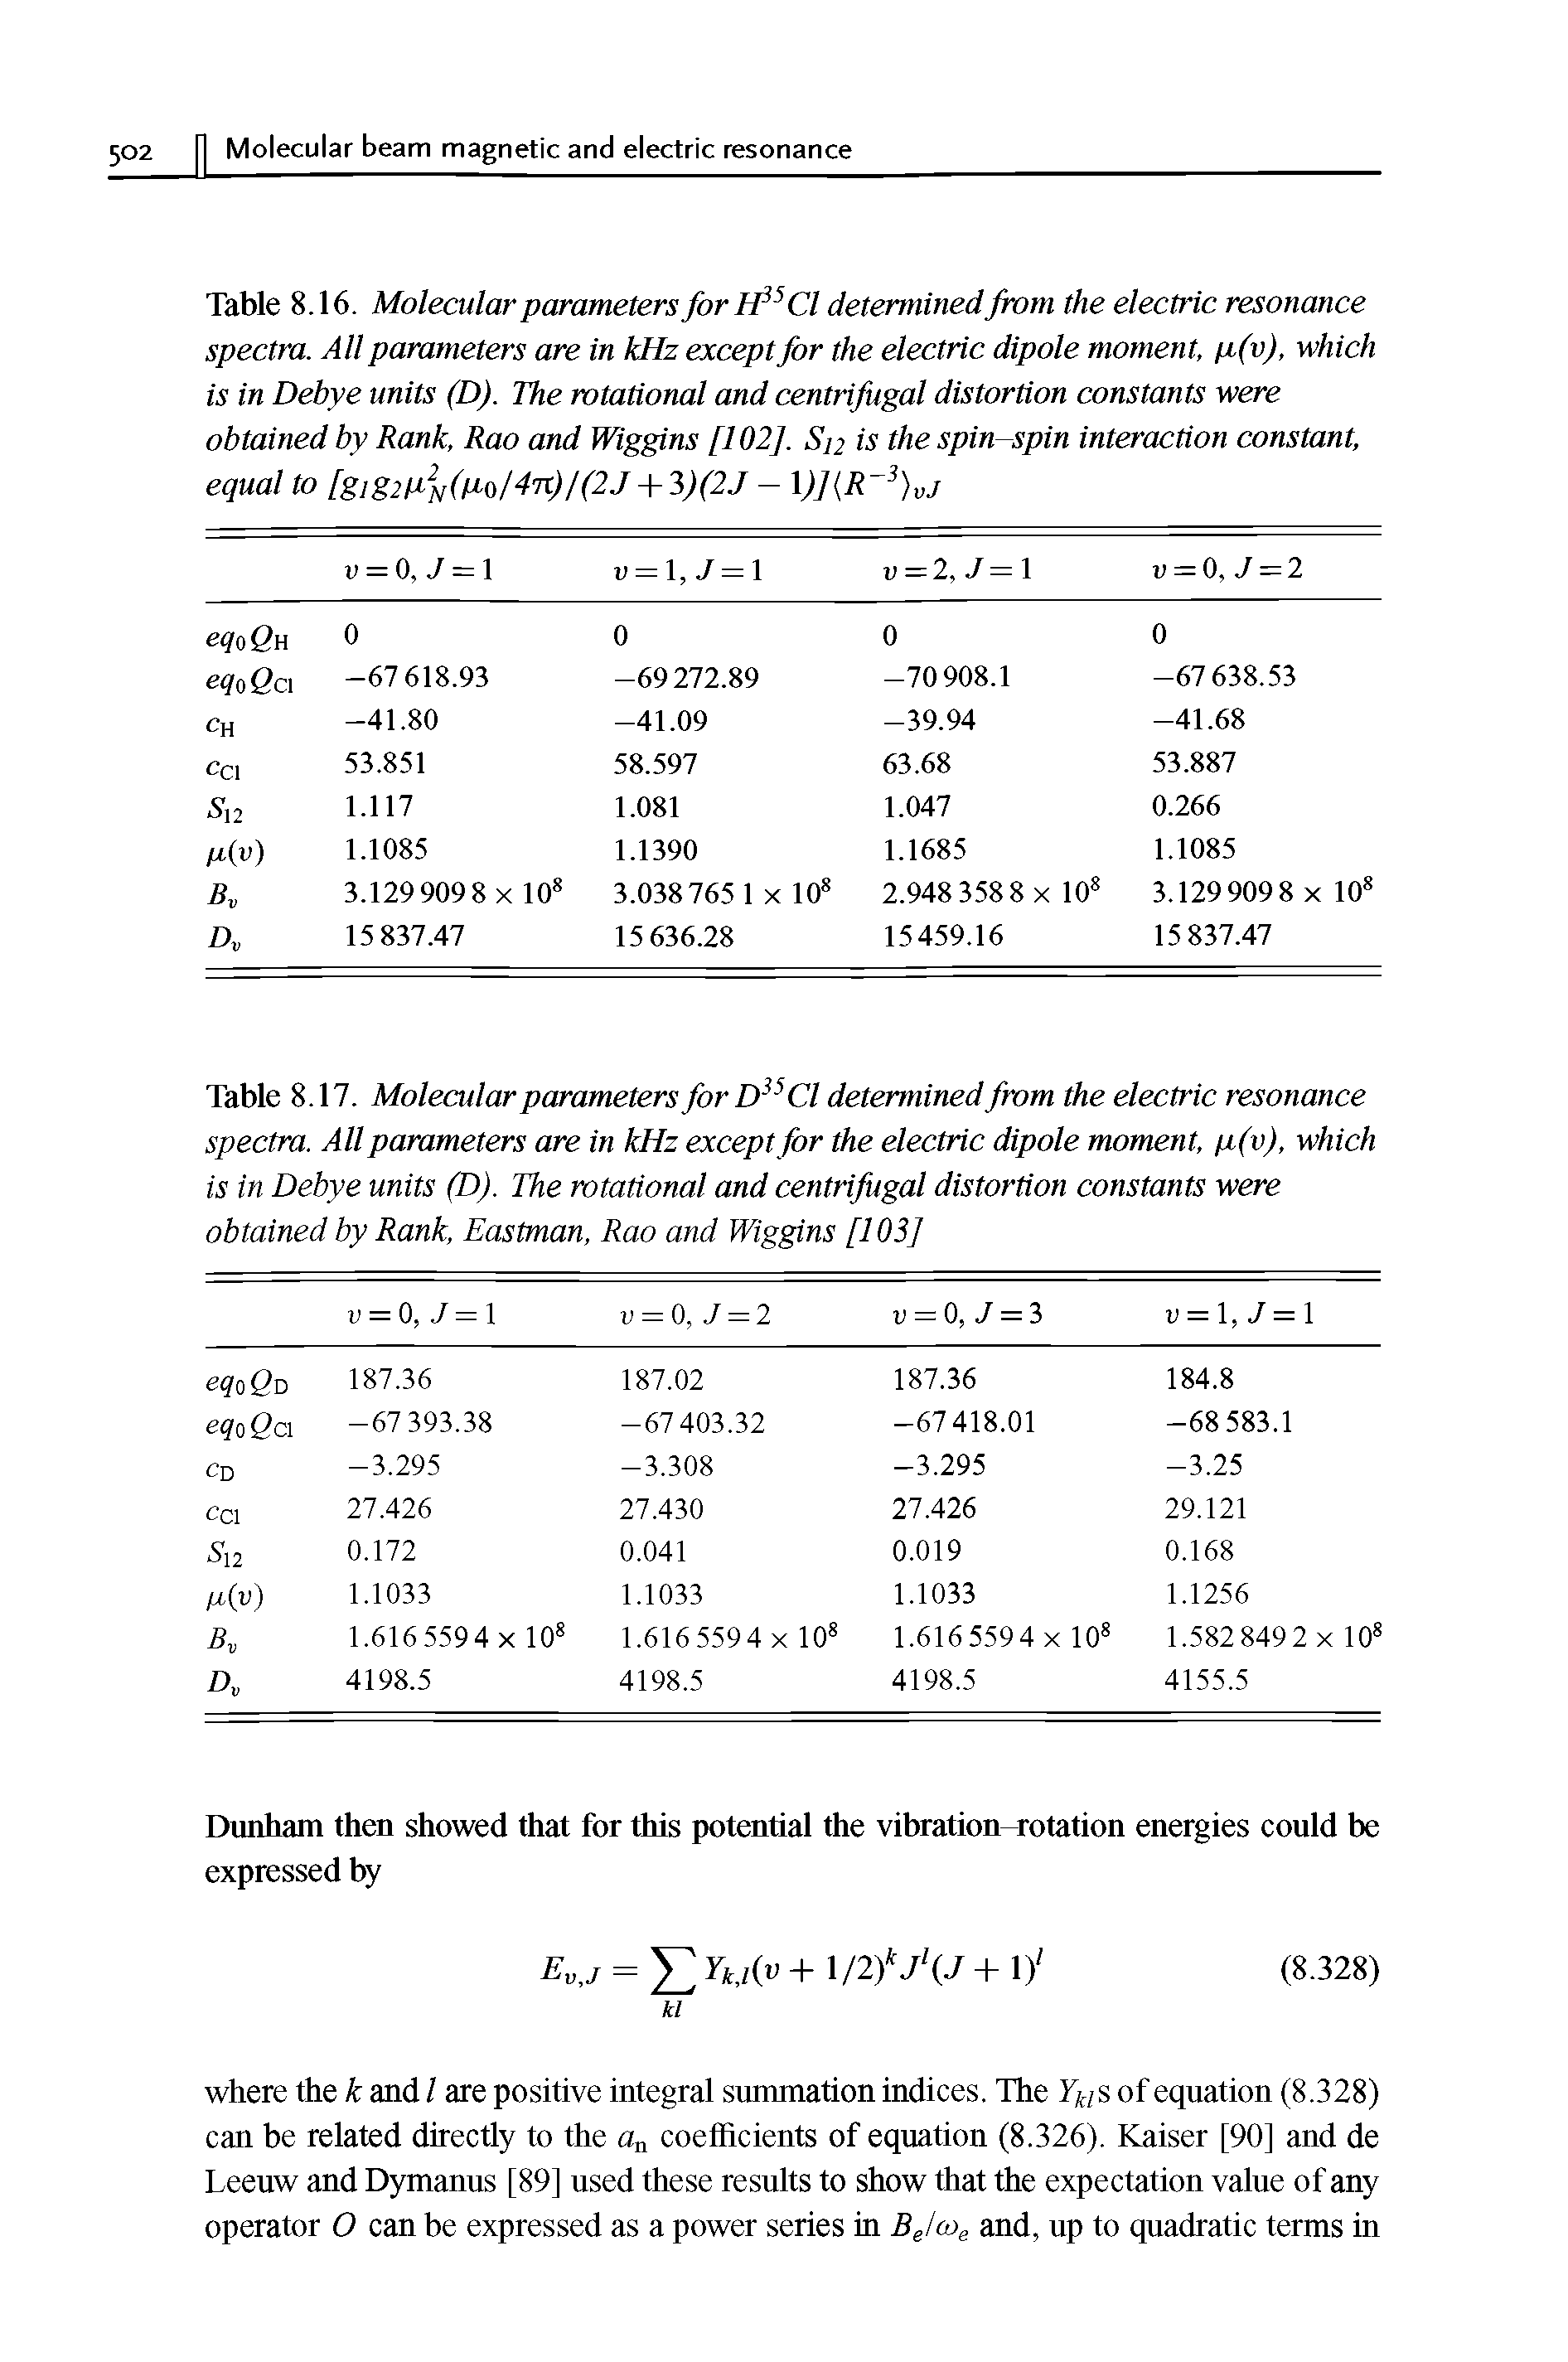 Table 8.16. Molecular parameters for H35 Cl determined from the electric resonance spectra. All parameters are in kHz except for the electric dipole moment, n(v), which is in Debye units (D). The rotational and centrifugal distortion constants were obtained by Rank, Rao and Wiggins [102], S]2 is the spin-spin interaction constant, equal to [gig2ii2N(no/47t)/(2J + 3)(2J - 1)](R 3)vj...